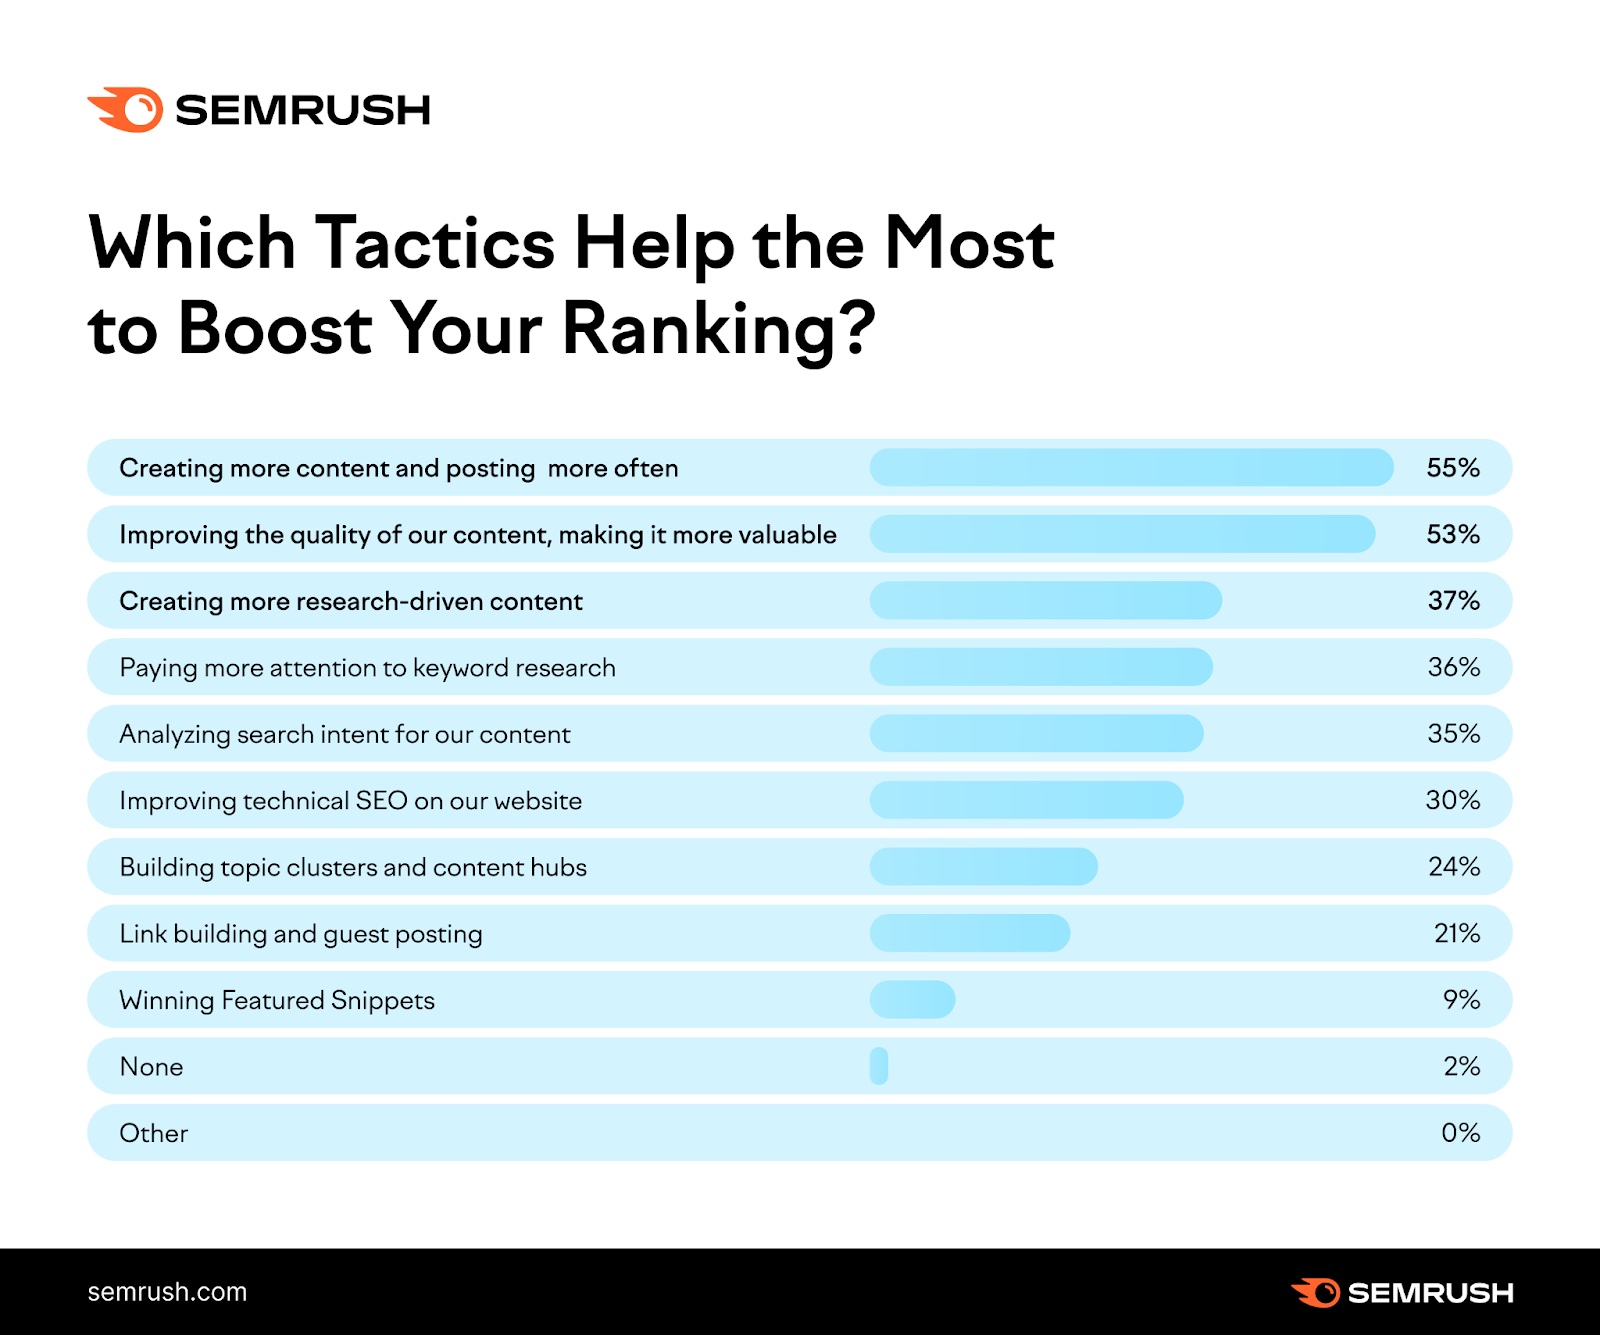 "Which tactics help the most to boost your ranking?" answers